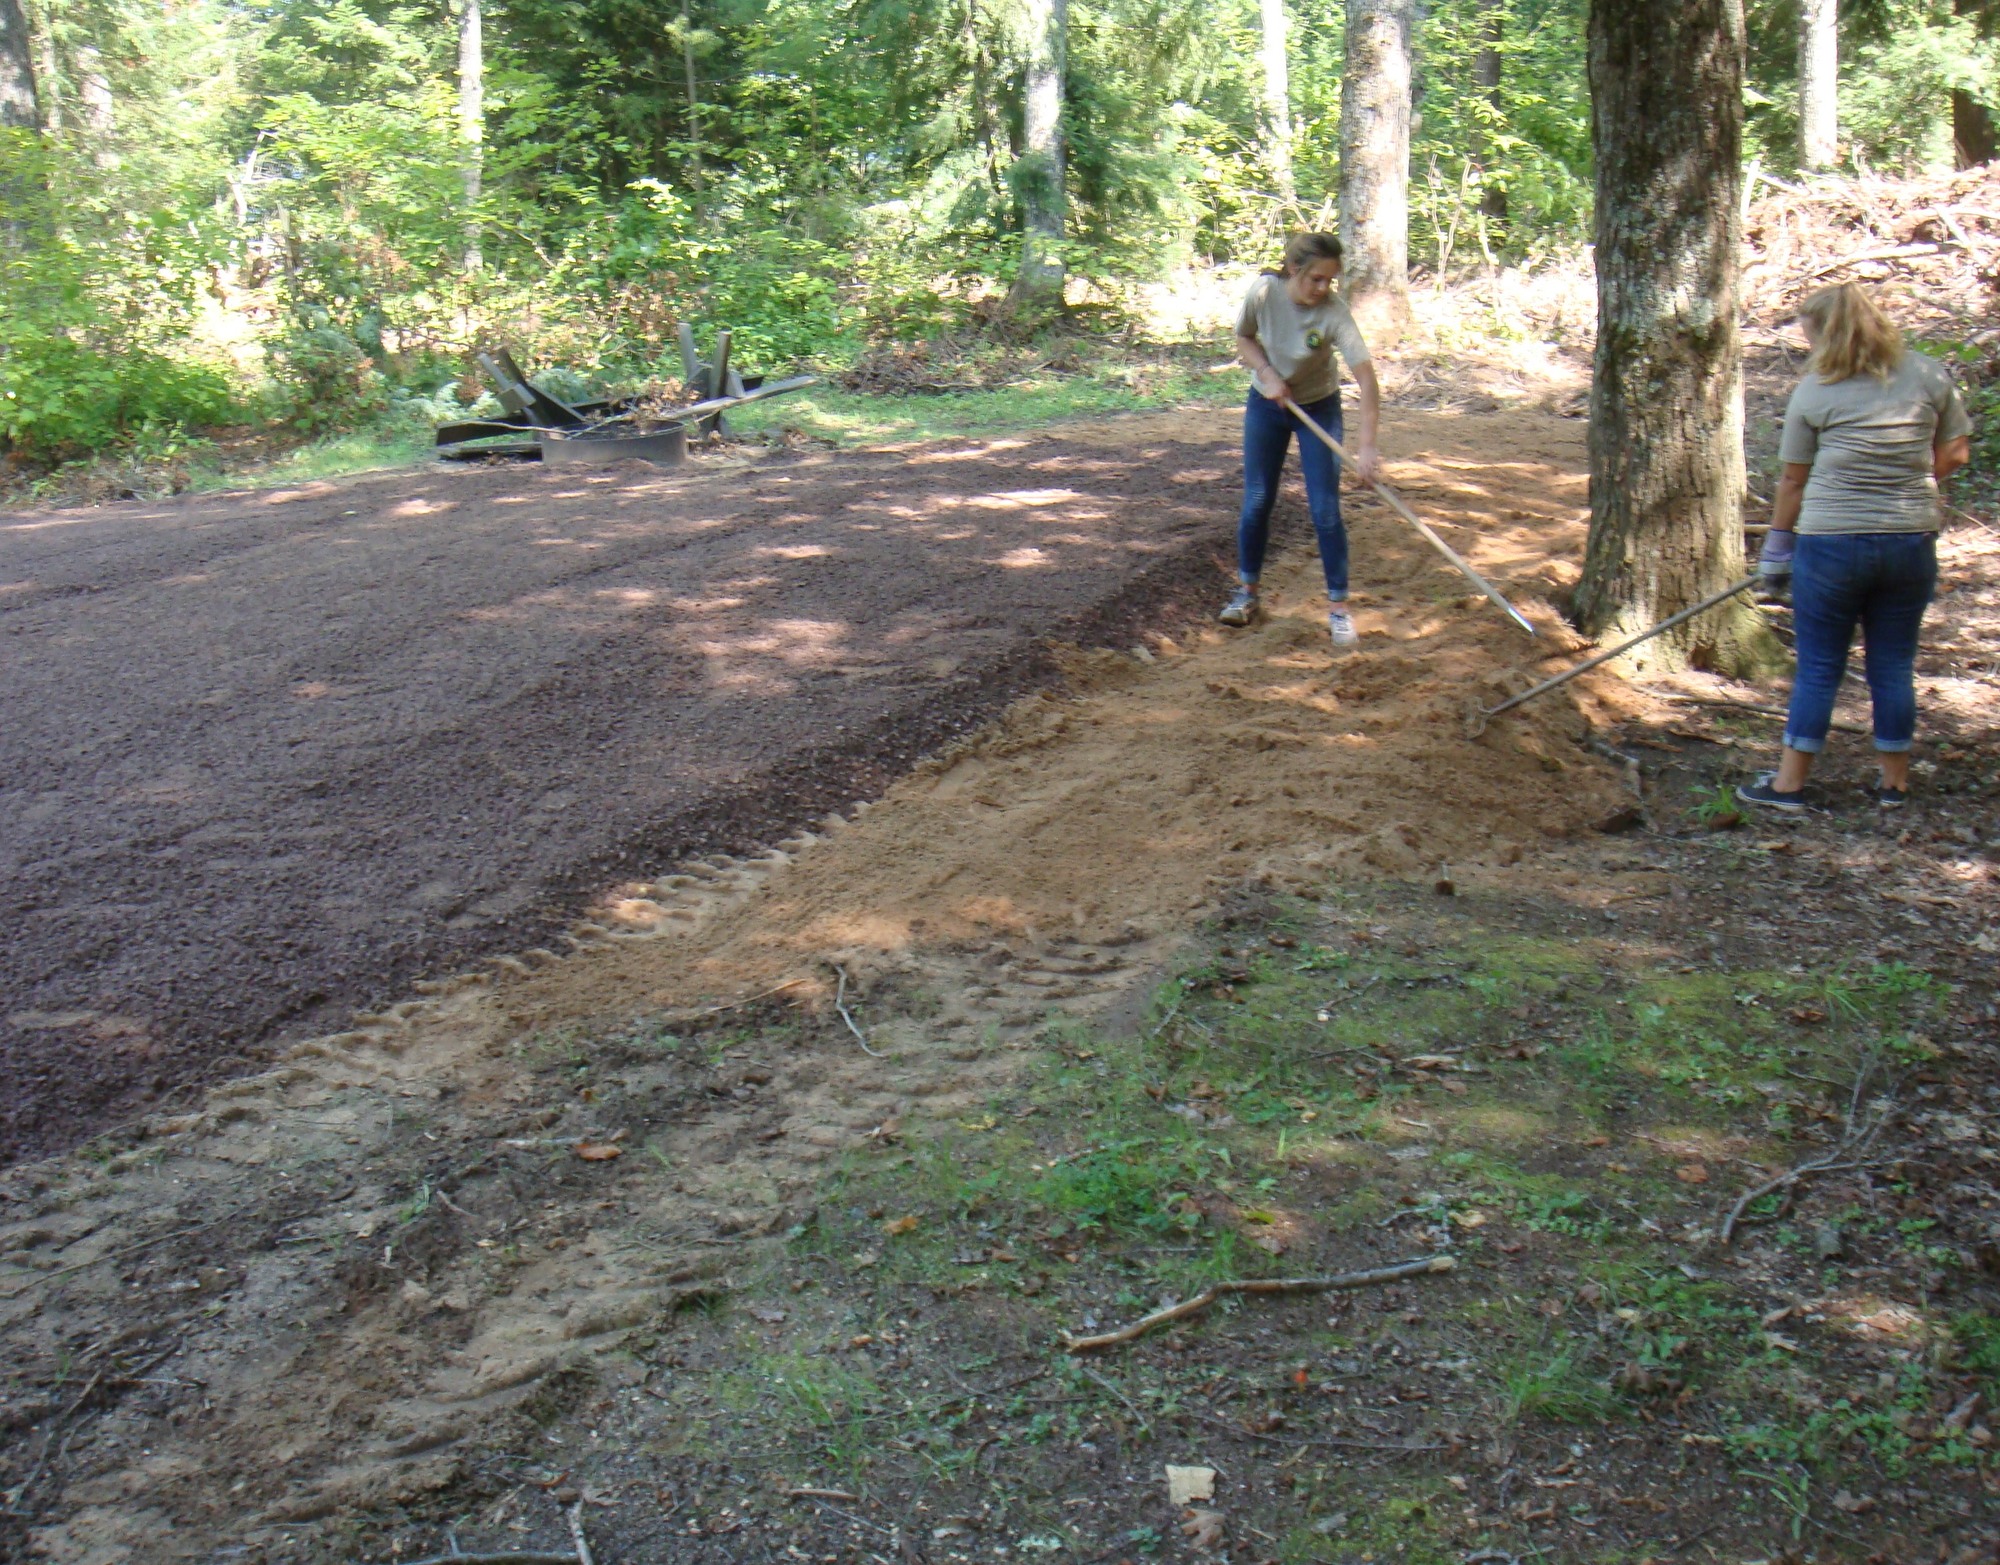 Michigan Department of Natural Resources staff works on continuing repairs from July storm damage at the Emily Lake State Forest Campground.